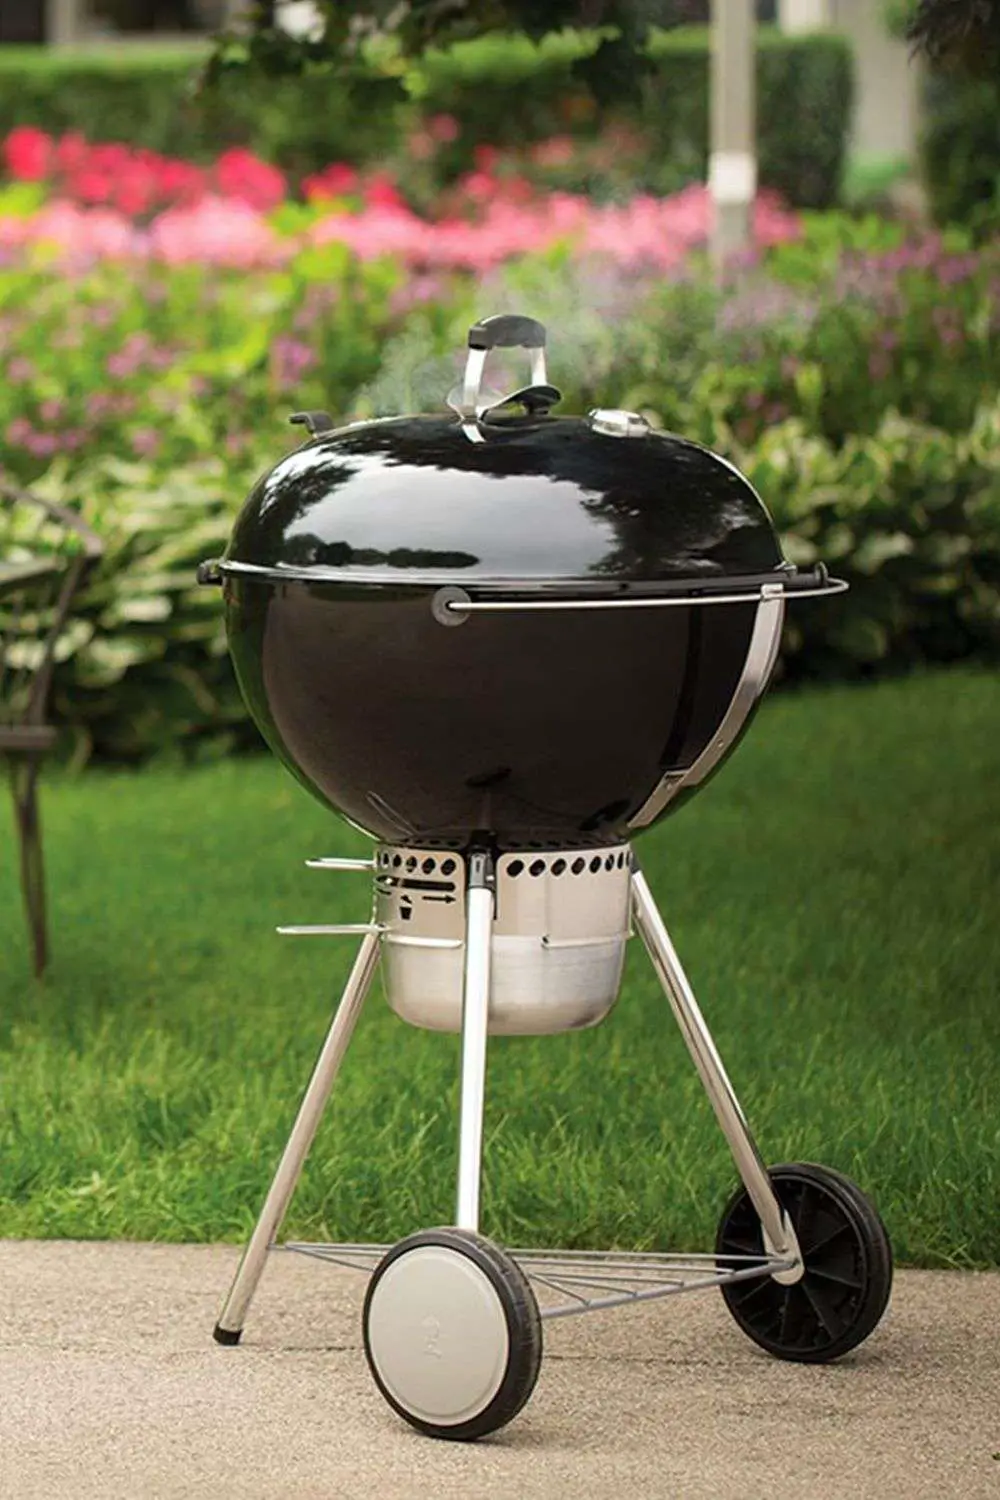 Top 10 Weber Grills (March 2021): Reviews &  Buyers Guide